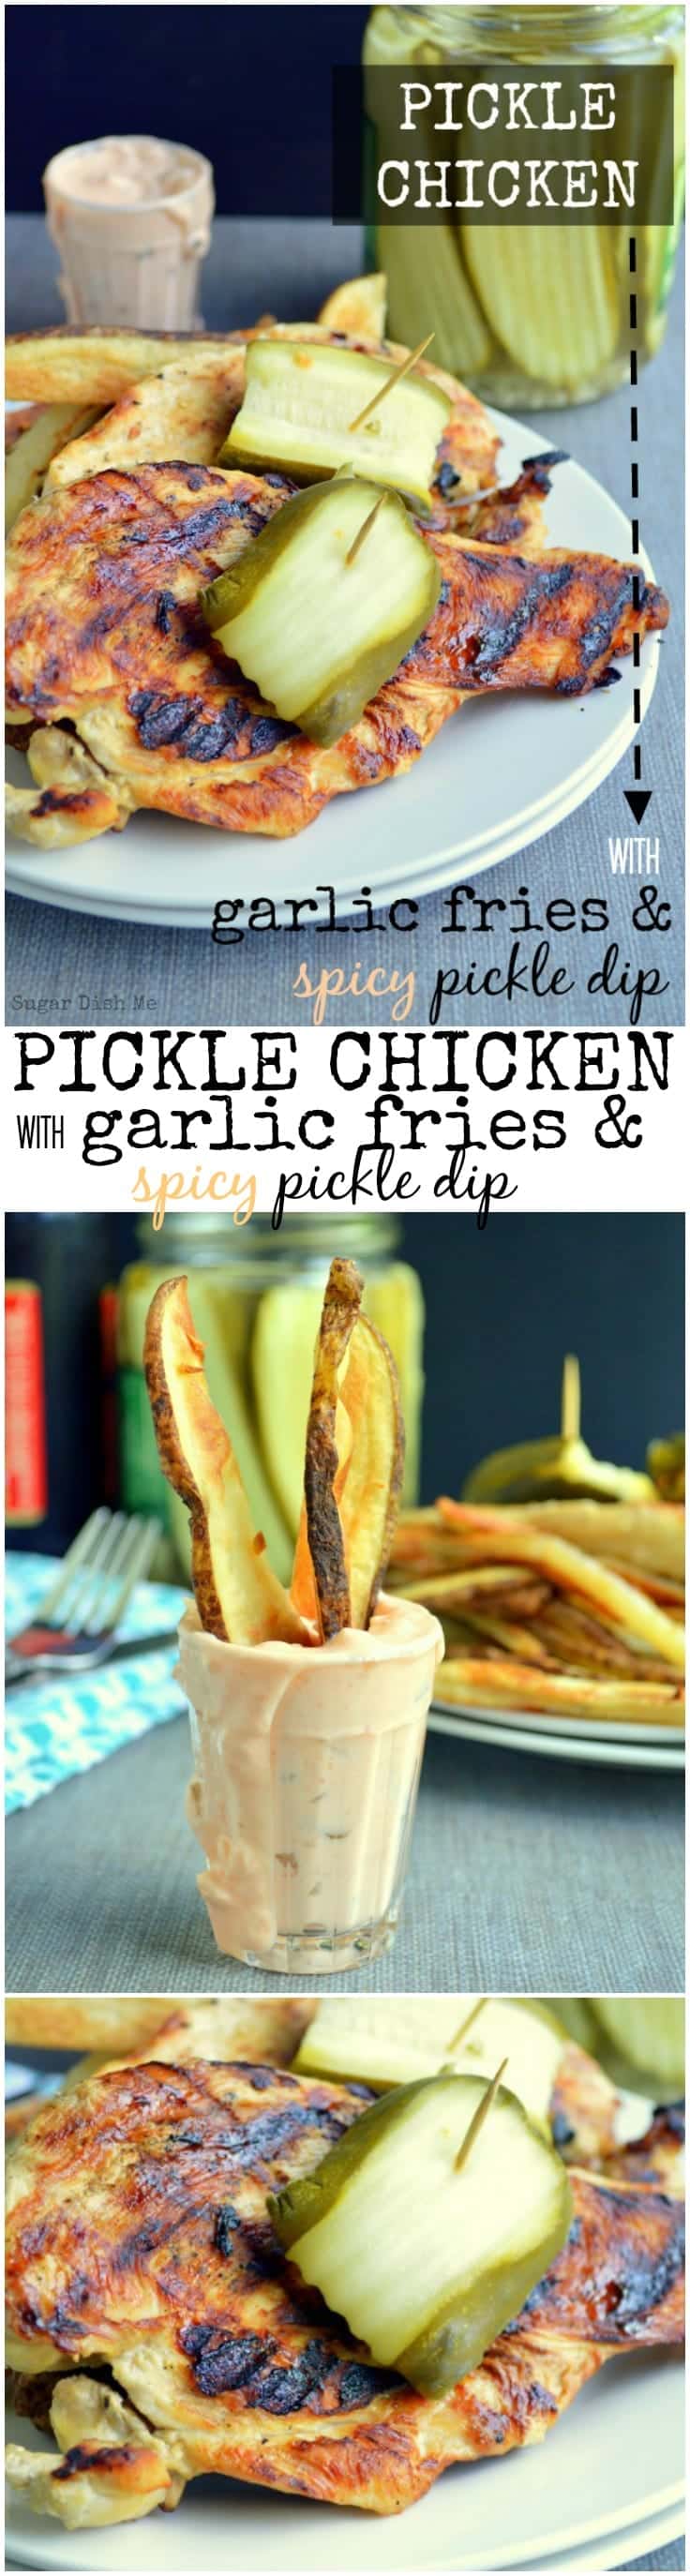 Chicken breasts marinated in leftover pickle juice! Grilled and served with crispy roasted garlic fries and a spicy pickle dip made with Greek yogurt. A delicious and healthy 30-minute meal!